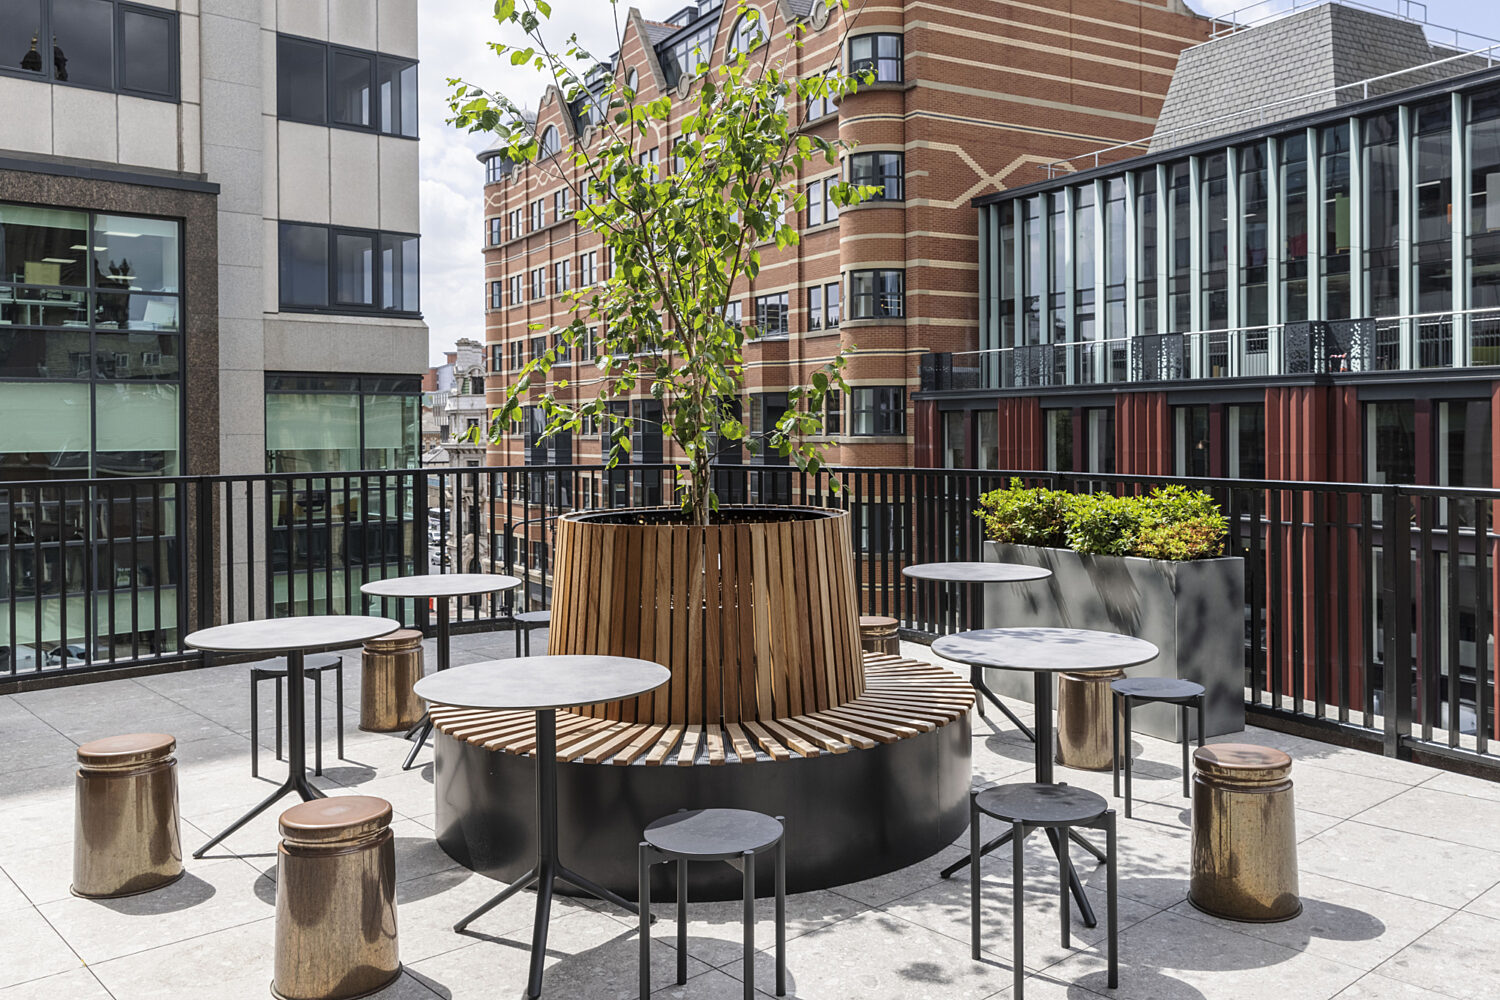 Outdoor seating at Castleforge Leeds